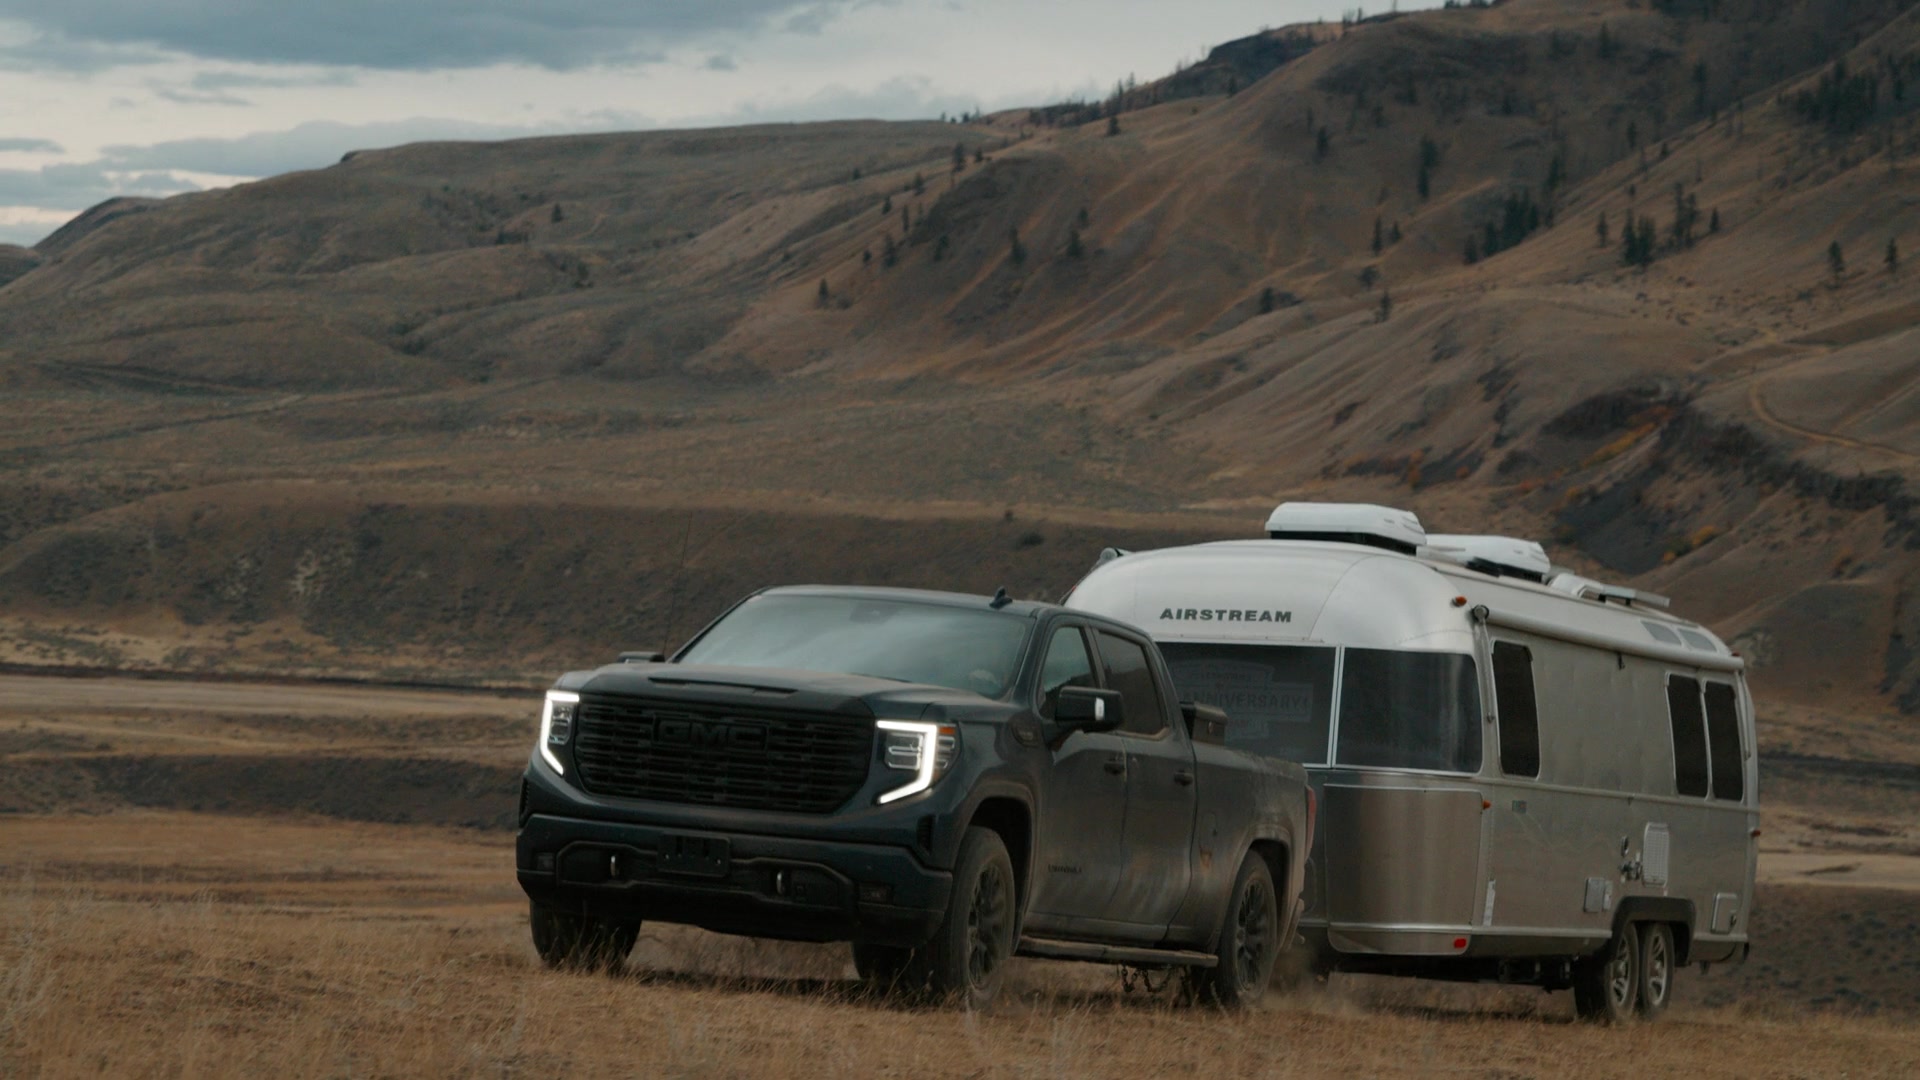 GMC Pickup Truck And Airstream Travel Trailer In Tracker S01E01